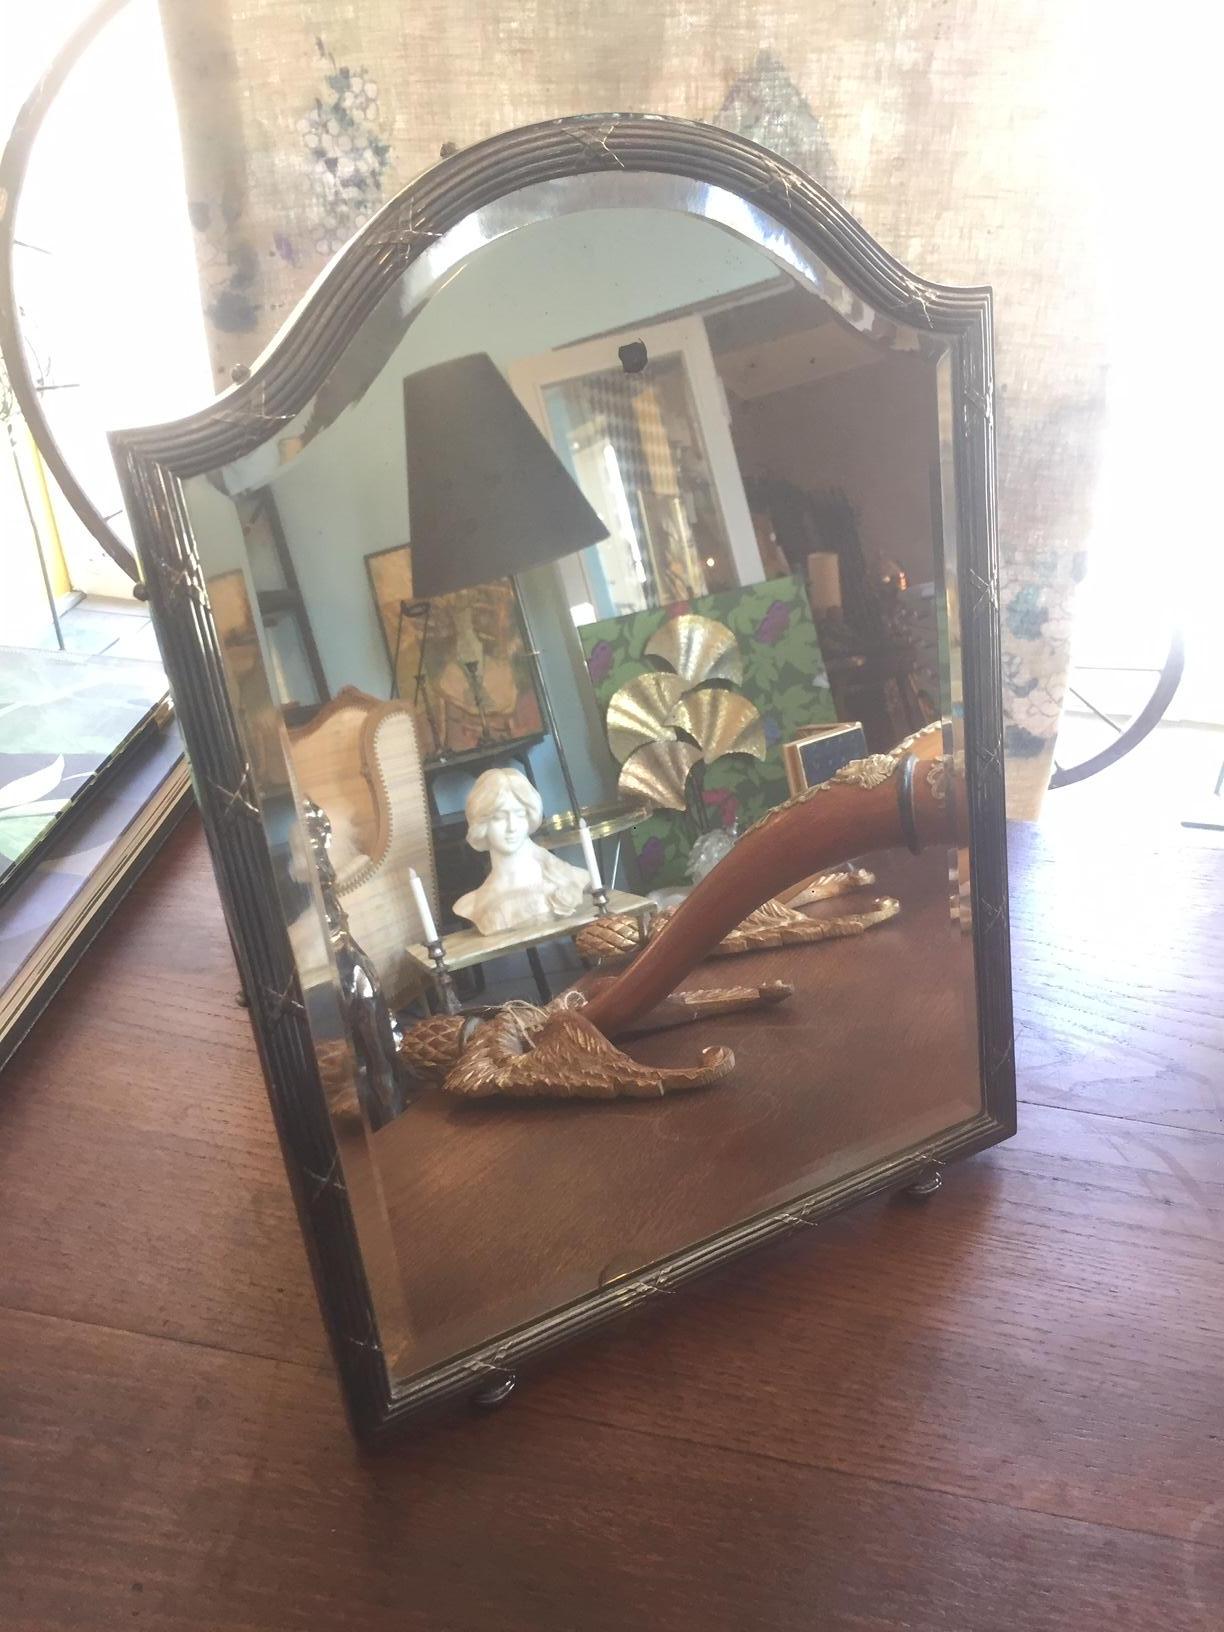 Very nice 20th century French silver plate table mirror from the 1900s, wooden back (maybe rosewood). At the back there is a rope to hold the mirror.
Very nice quality. Beveled glass. Some mercury traces.